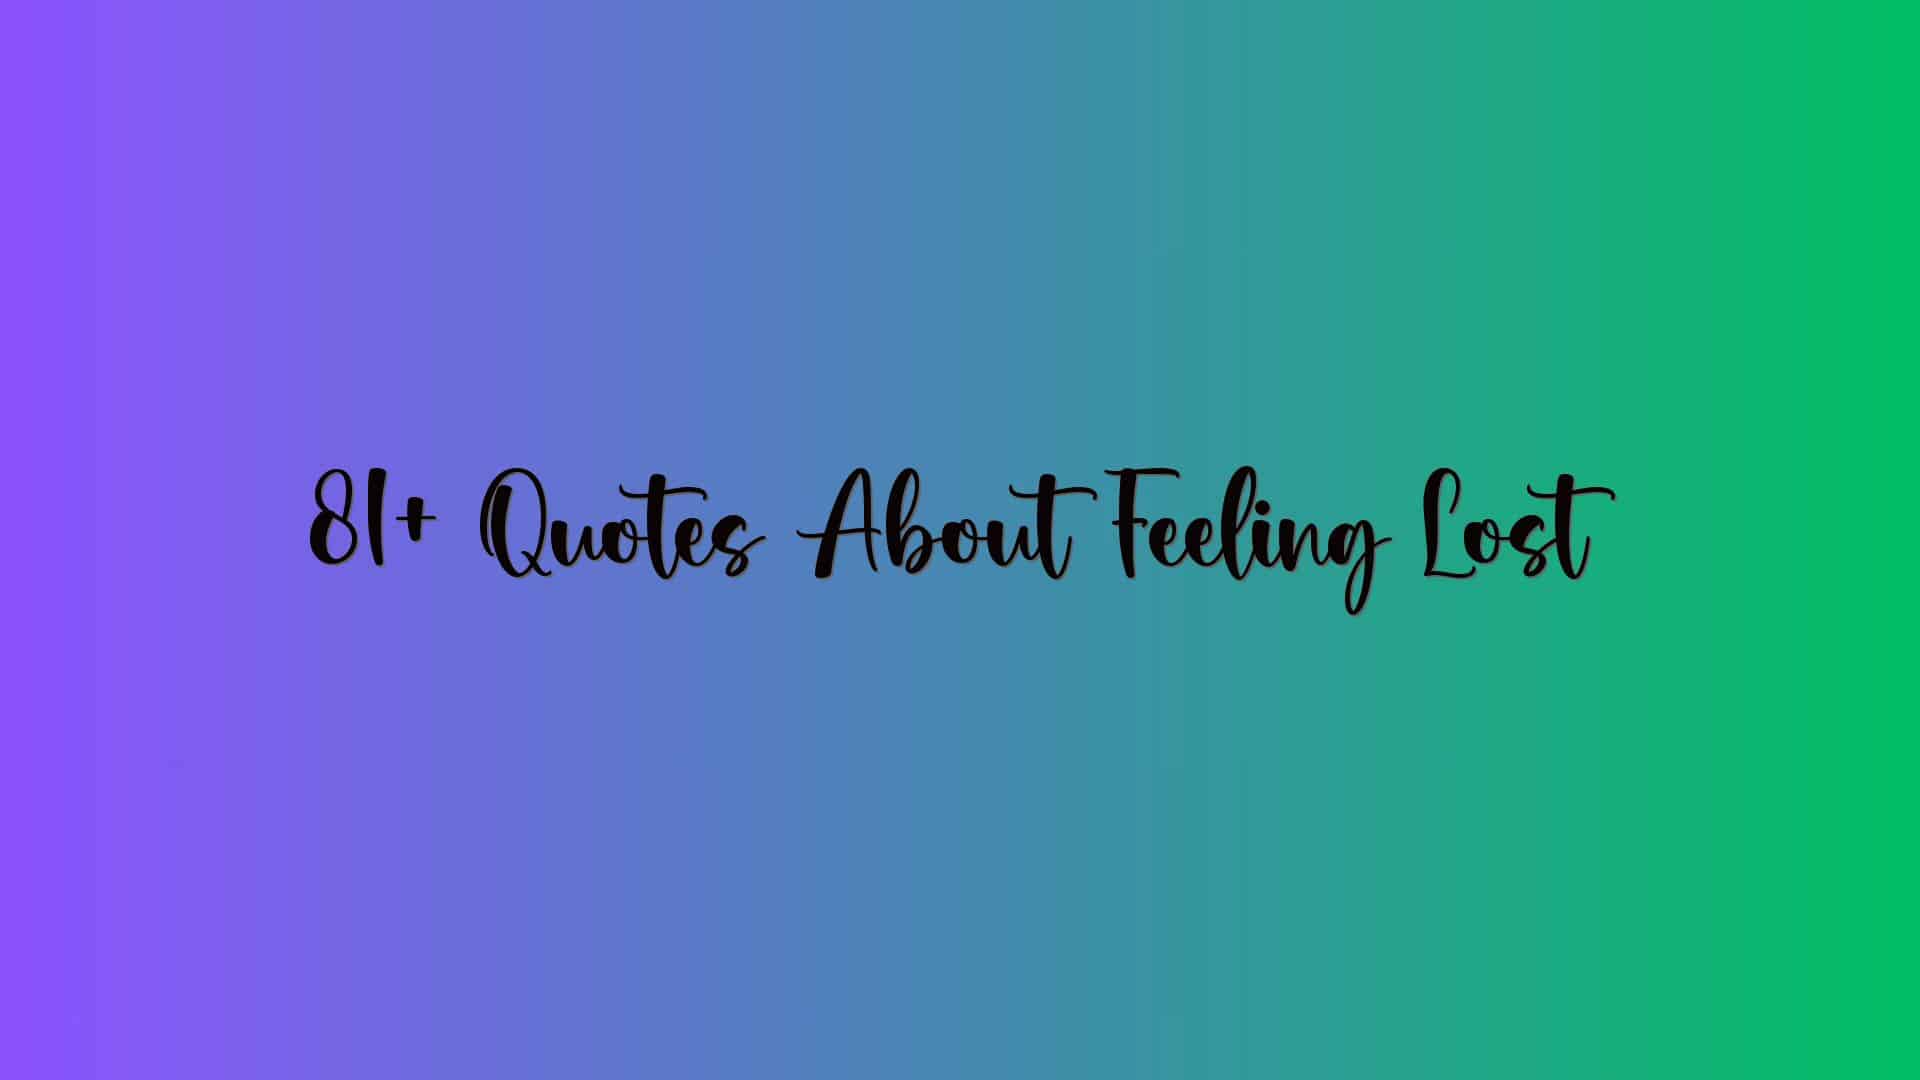 81+ Quotes About Feeling Lost